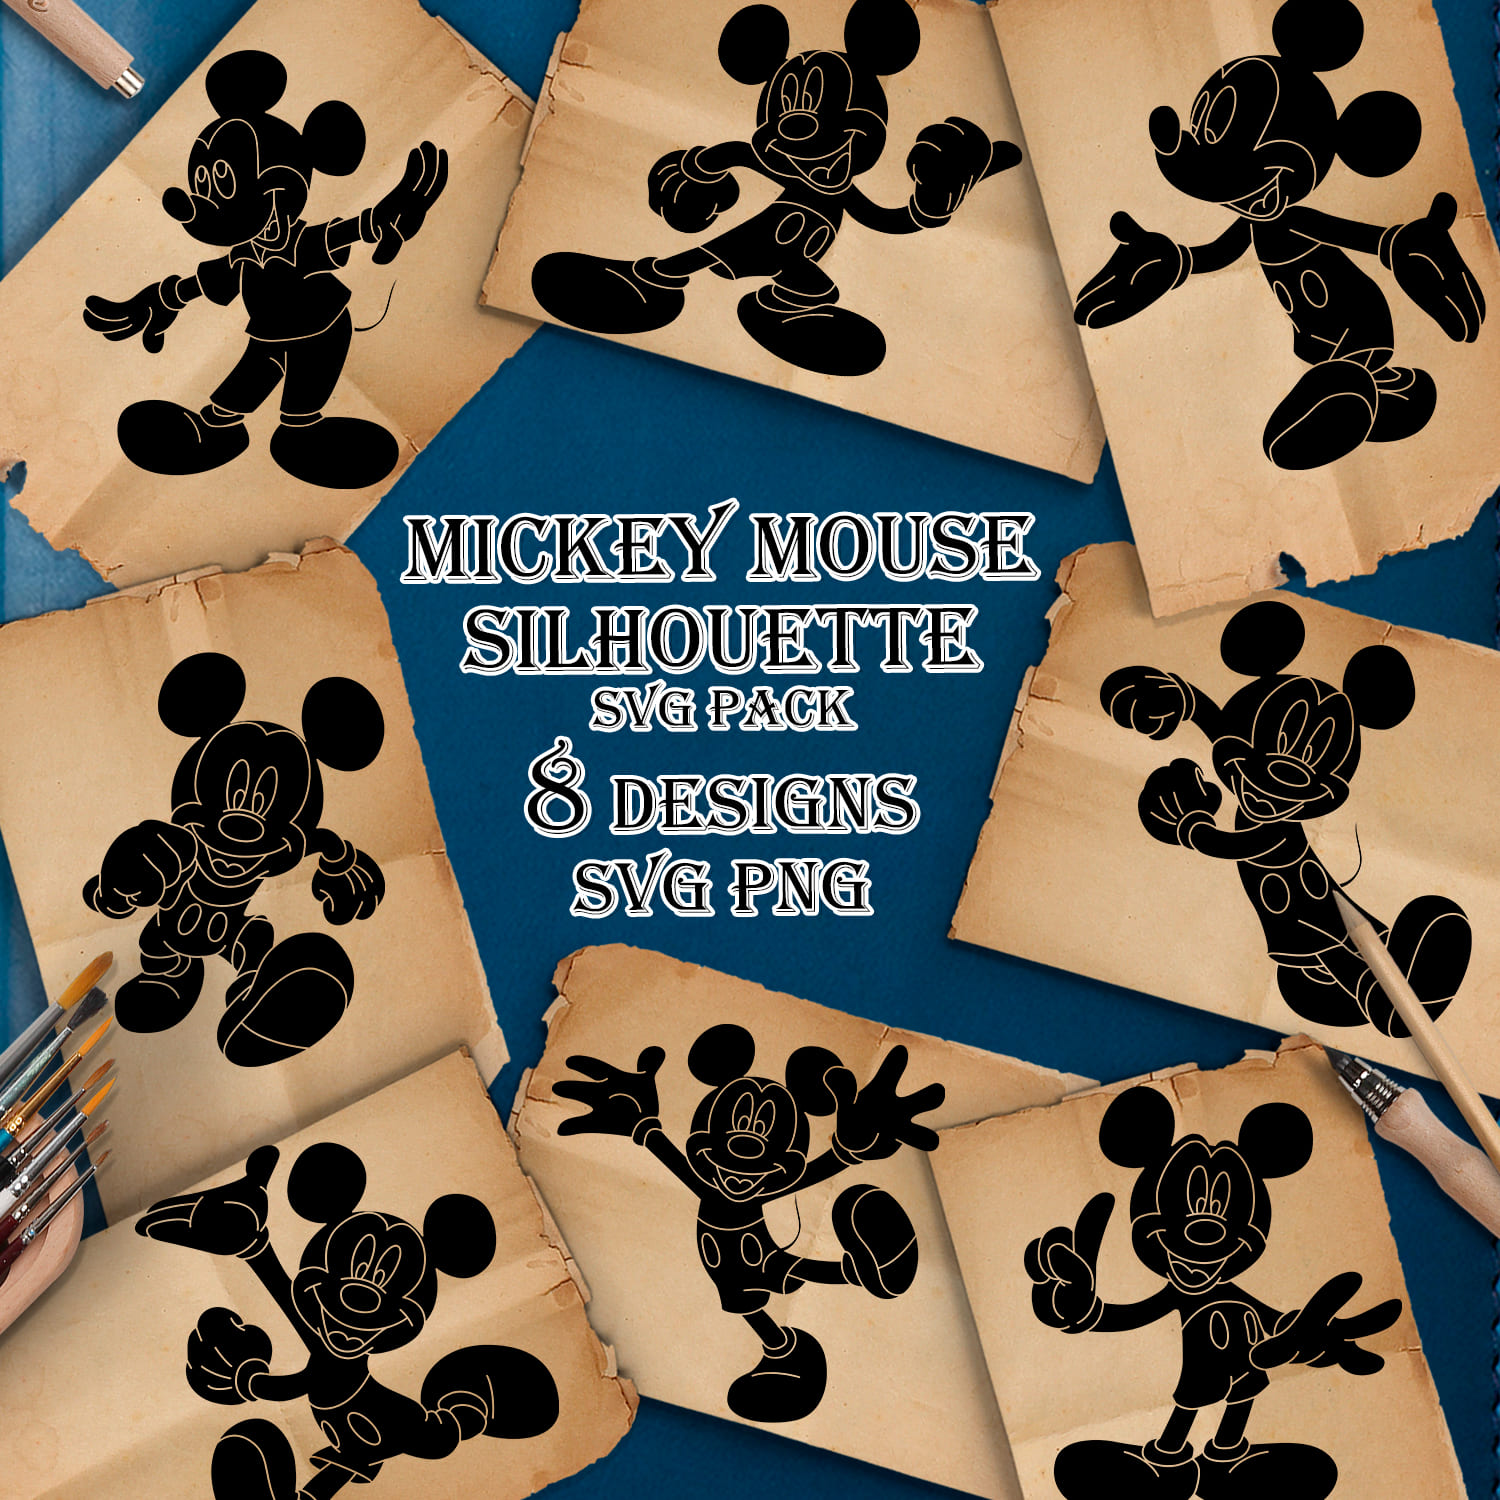 Mickey Mouse Silhouette SVG - main image preiew.